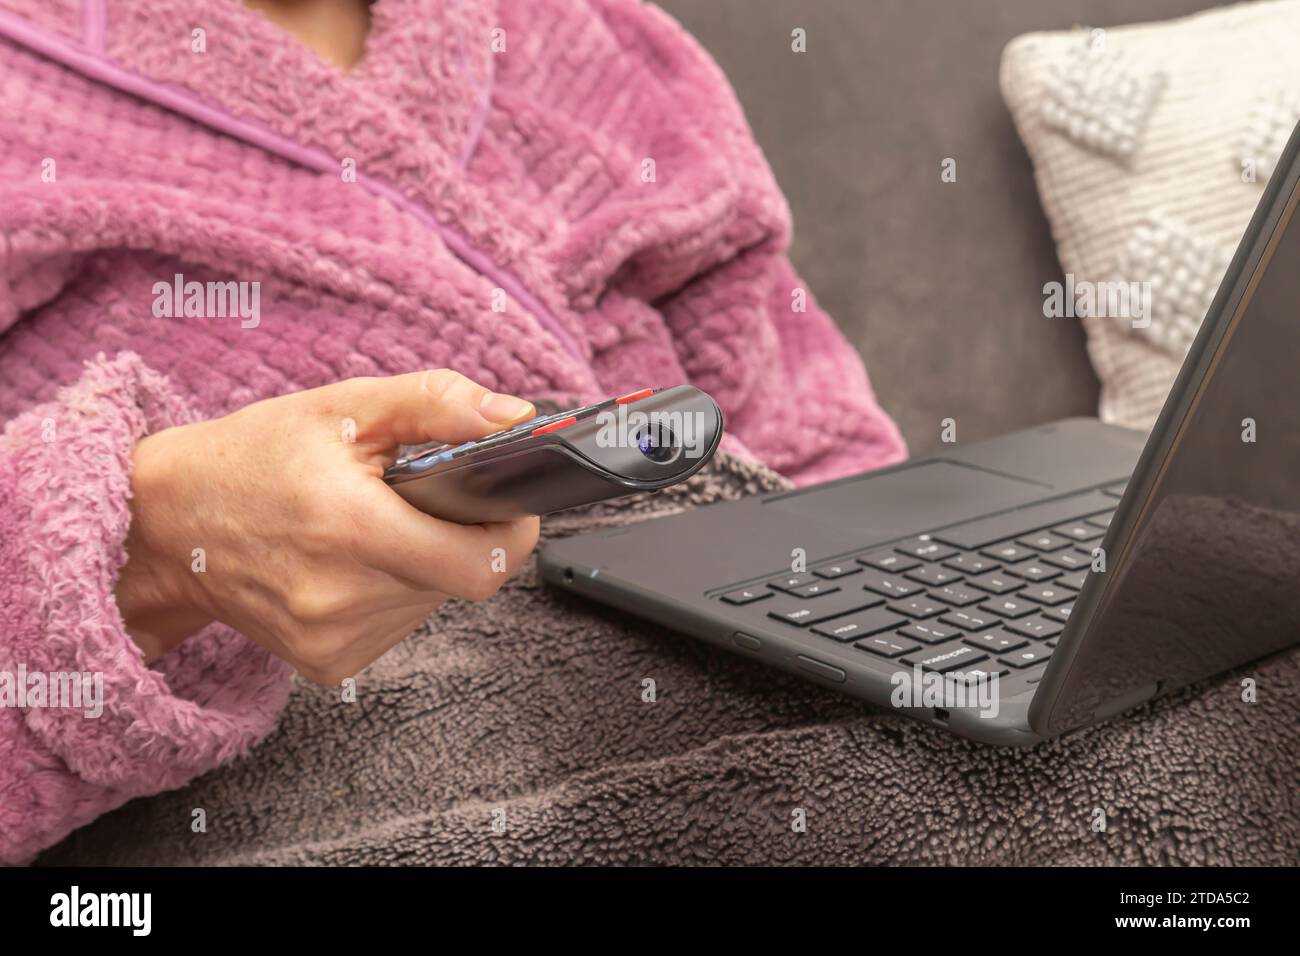 Woman sitting on sofa at home with TV remote control and laptop on her lap Stock Photo